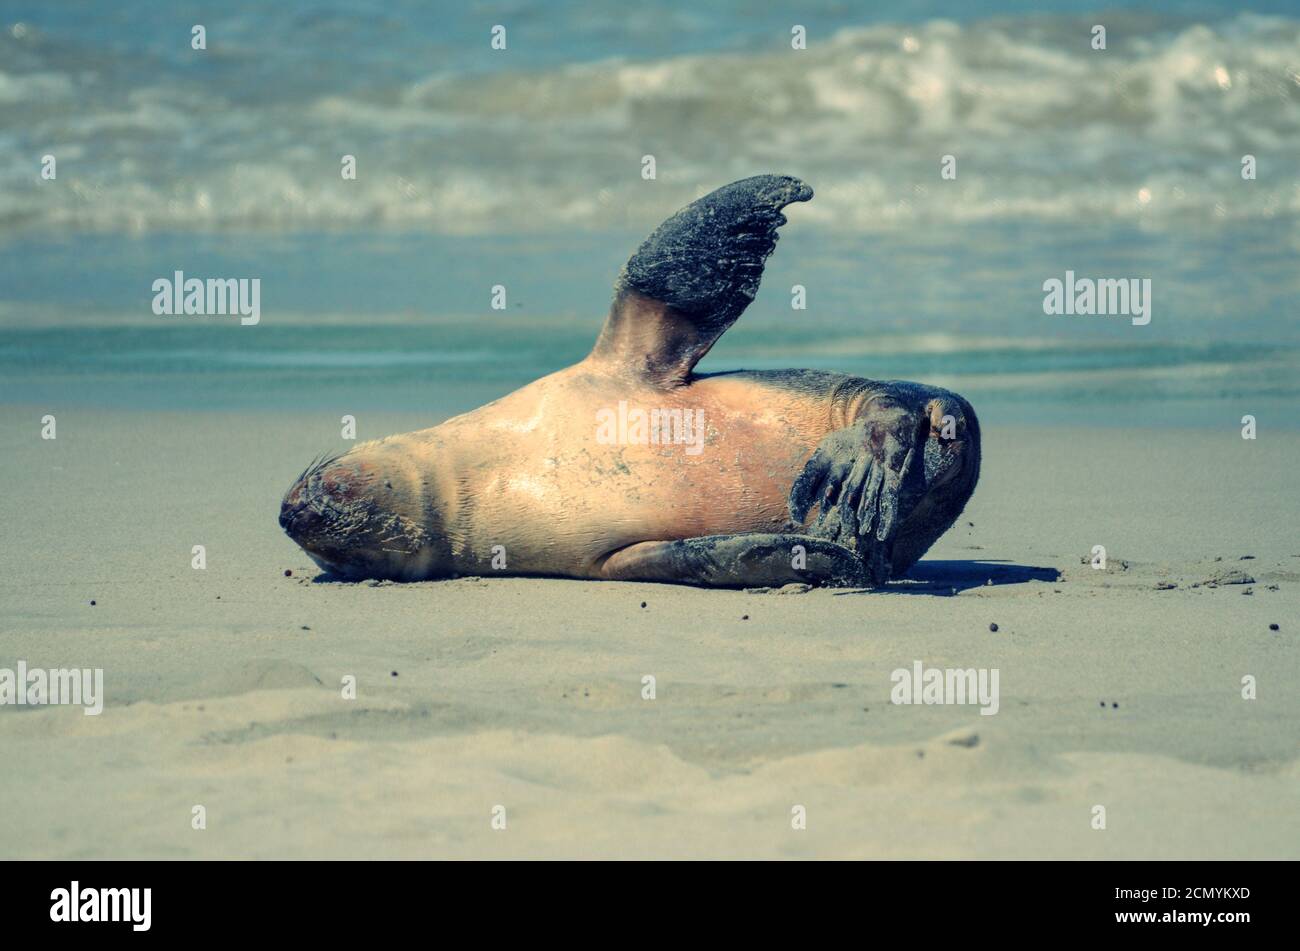 Single baby Seal laying on the sand with flipper in the air, with ocean in background. Stock Photo